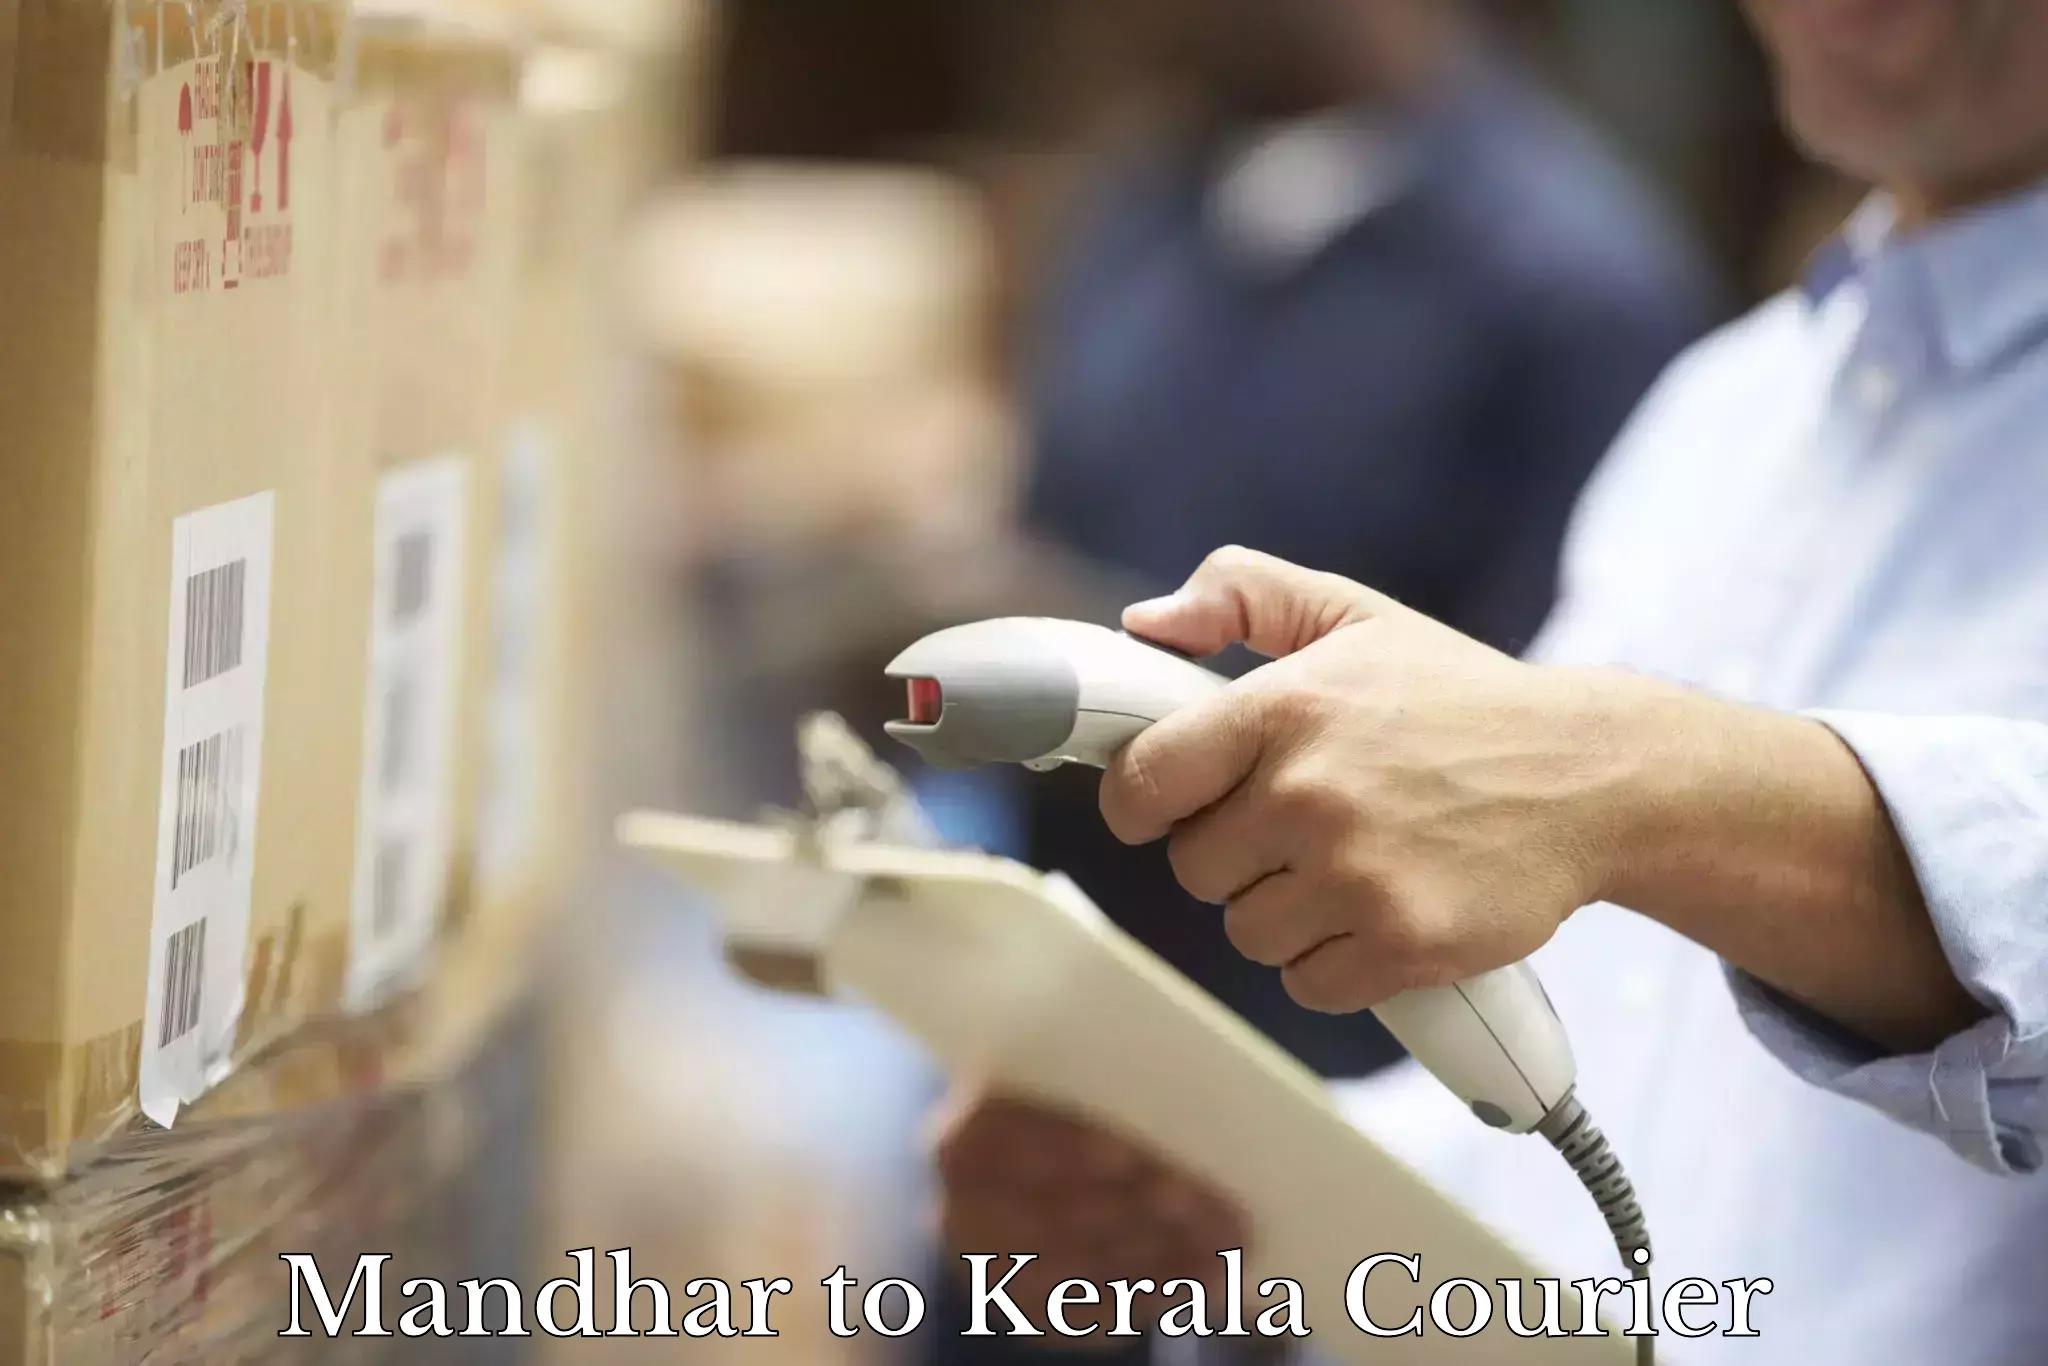 Courier service partnerships Mandhar to Cochin University of Science and Technology